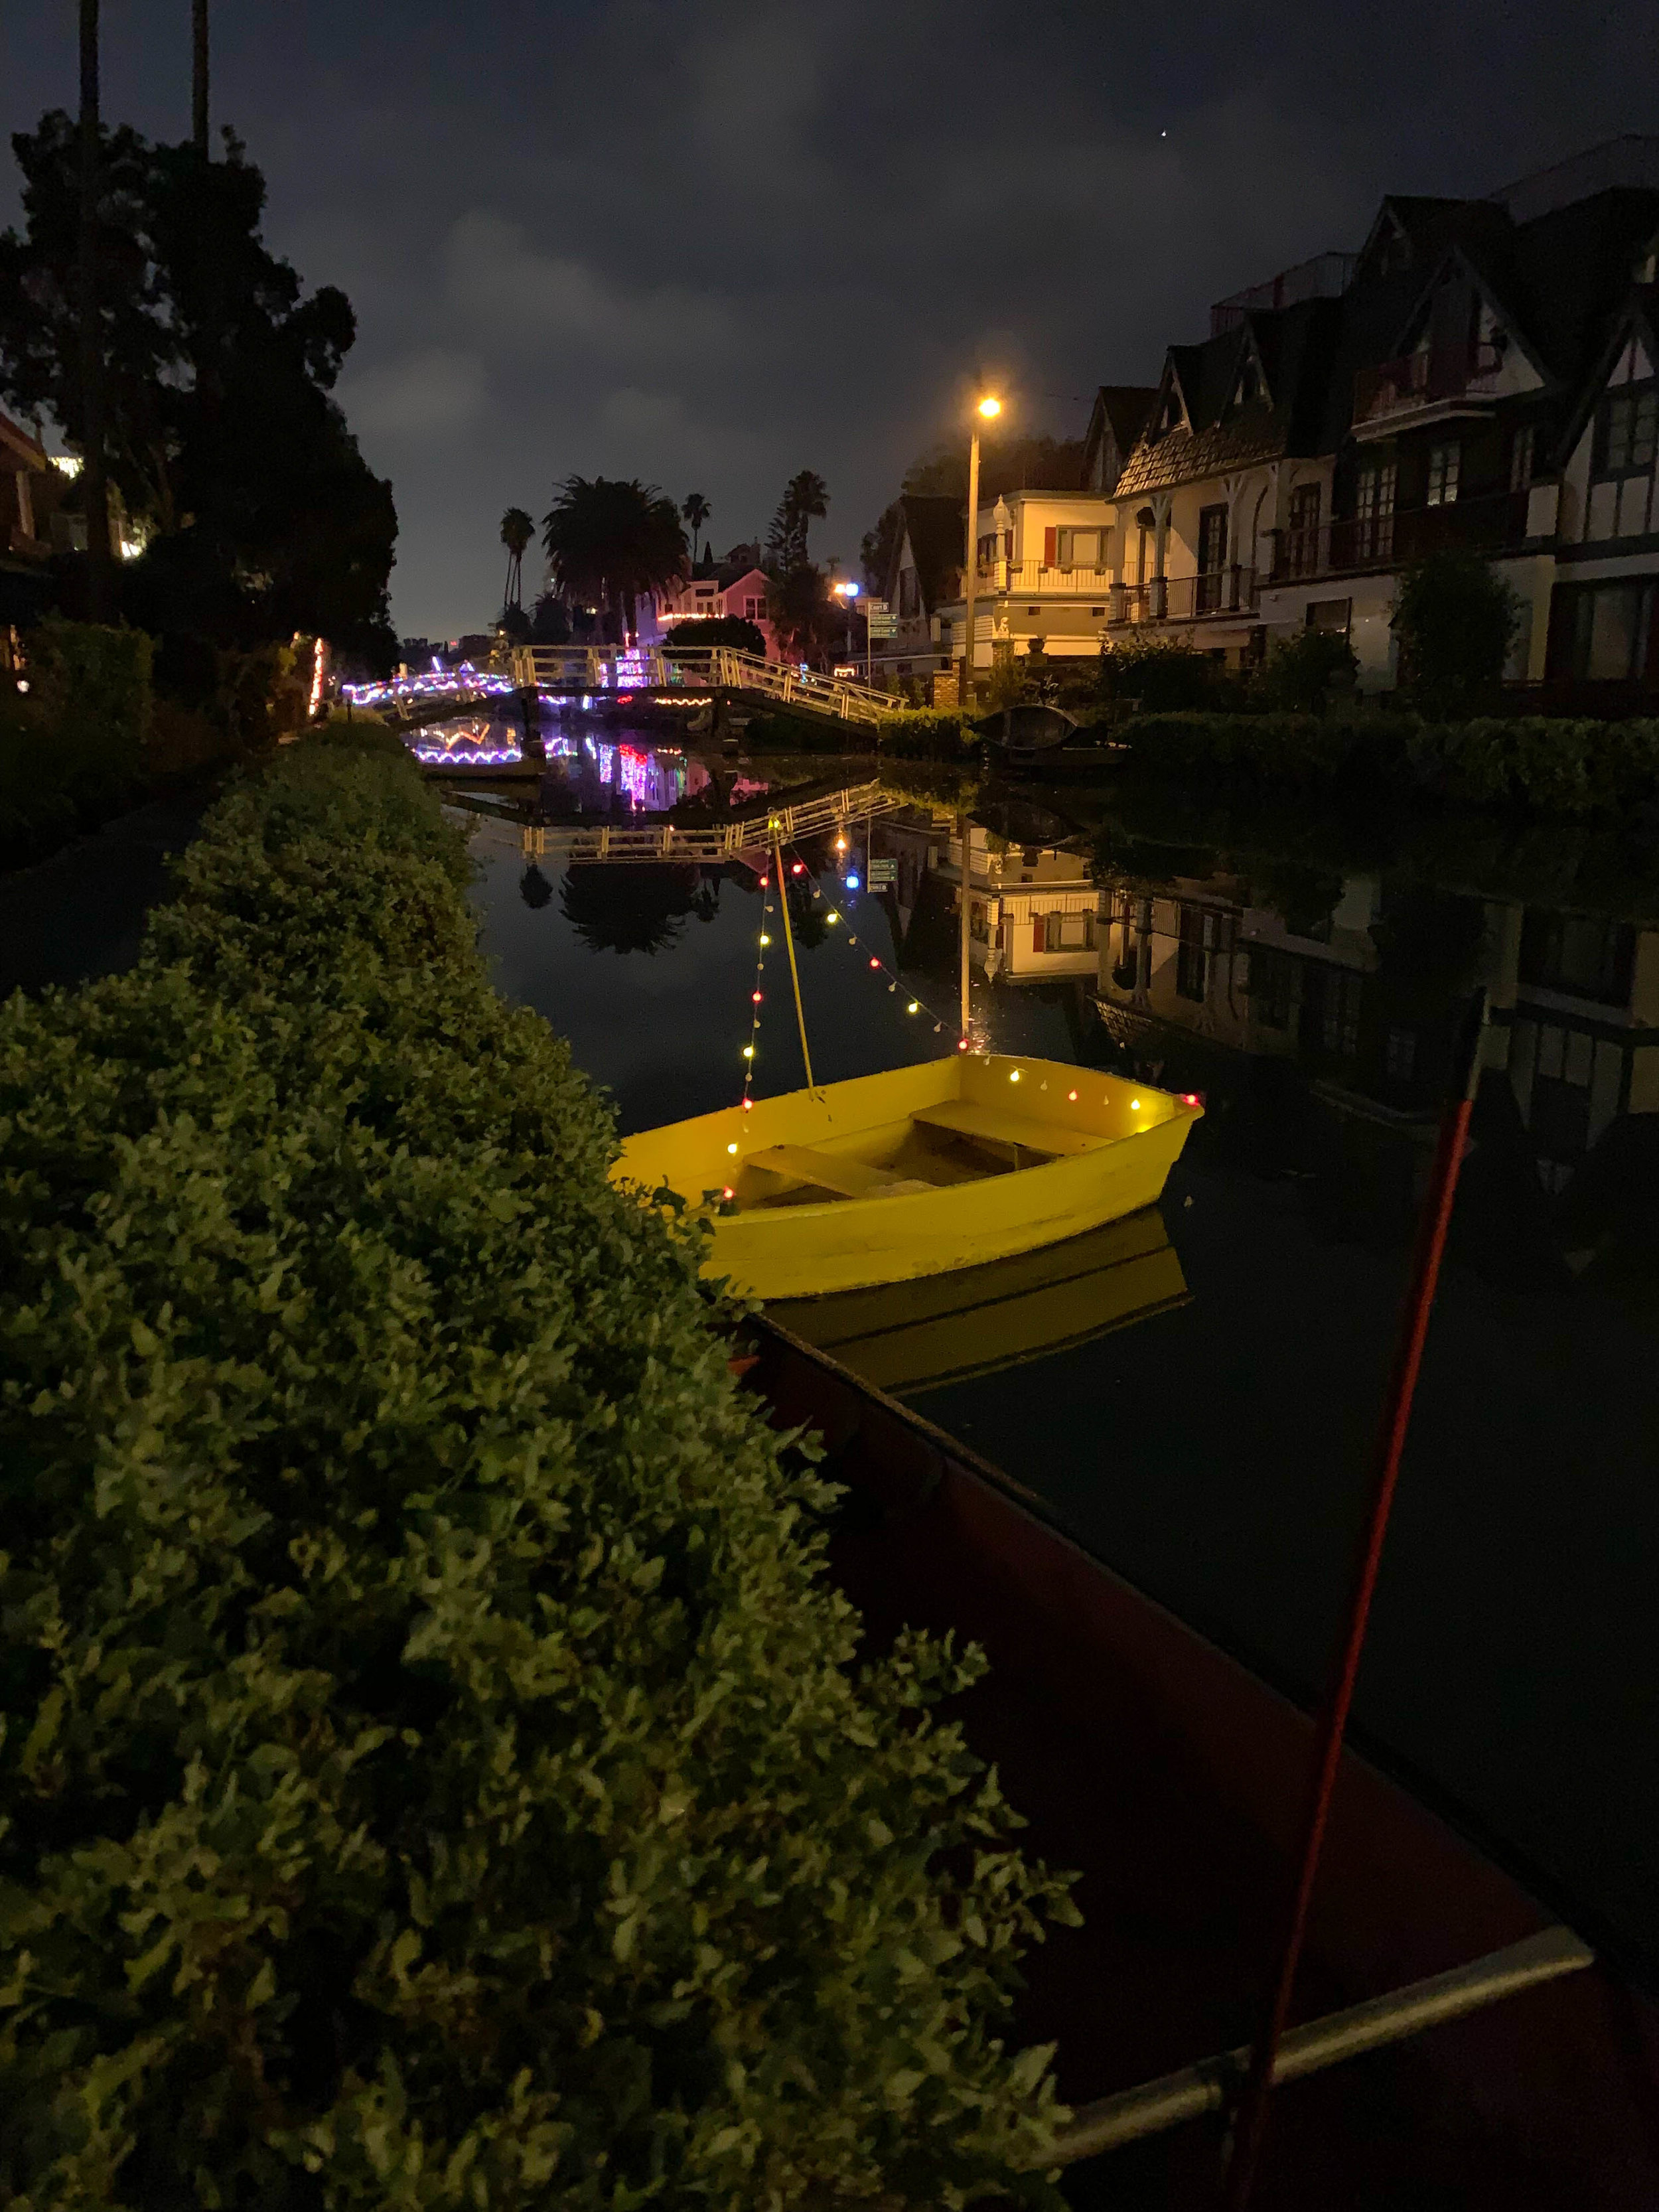 Christmas Lights in Los Angeles Venice Canals - Boat Decorations